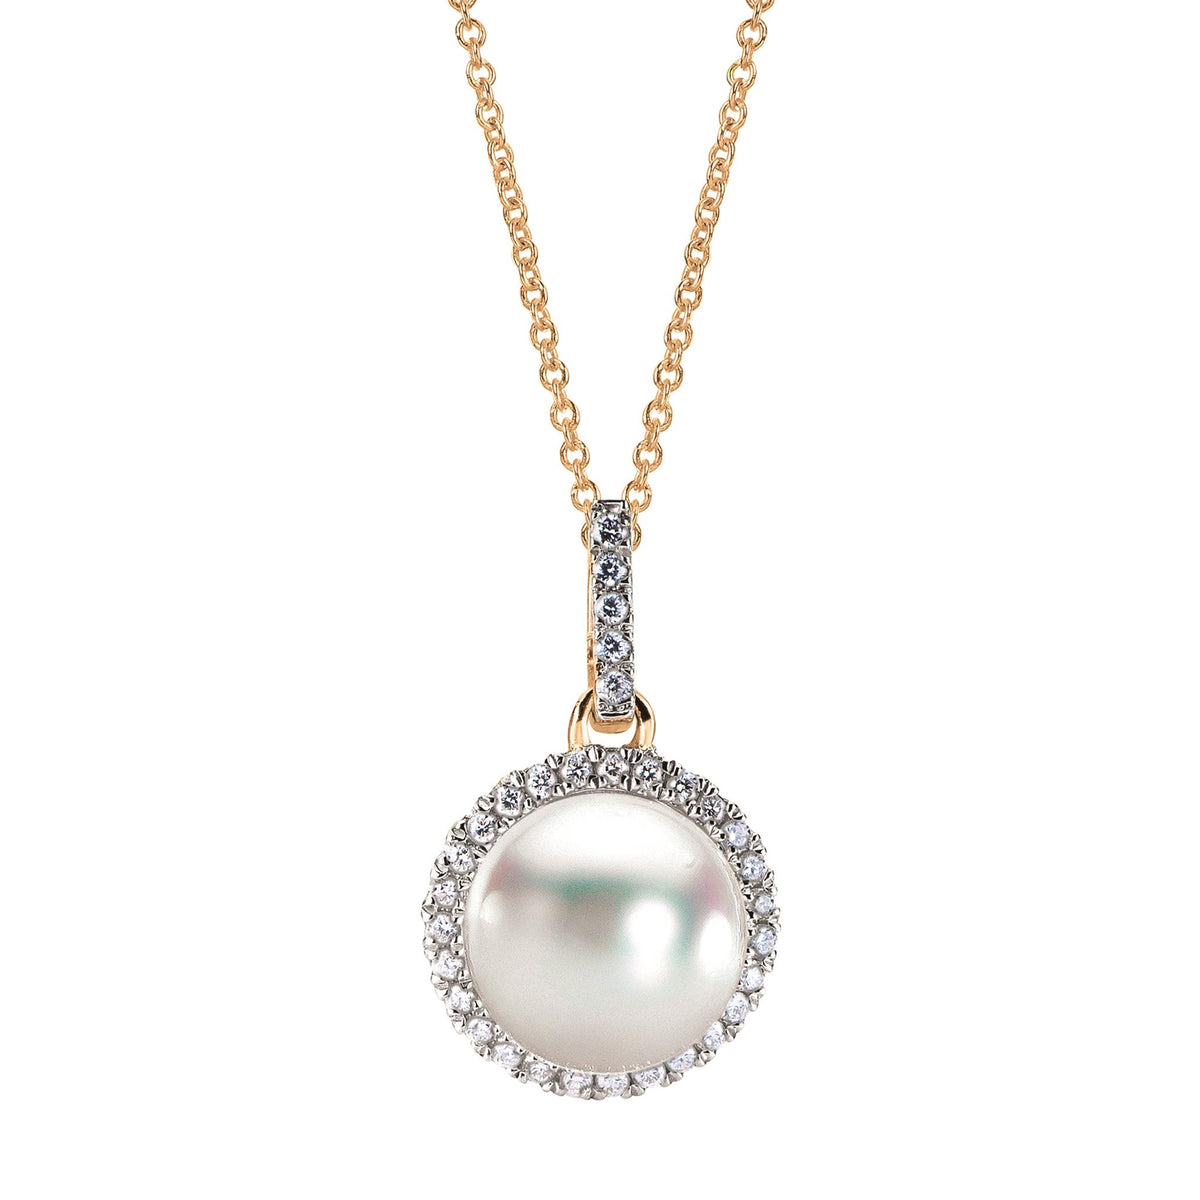 14Kt Yellow Gold Halo Pendant With mm Akoya Cultured Pearl